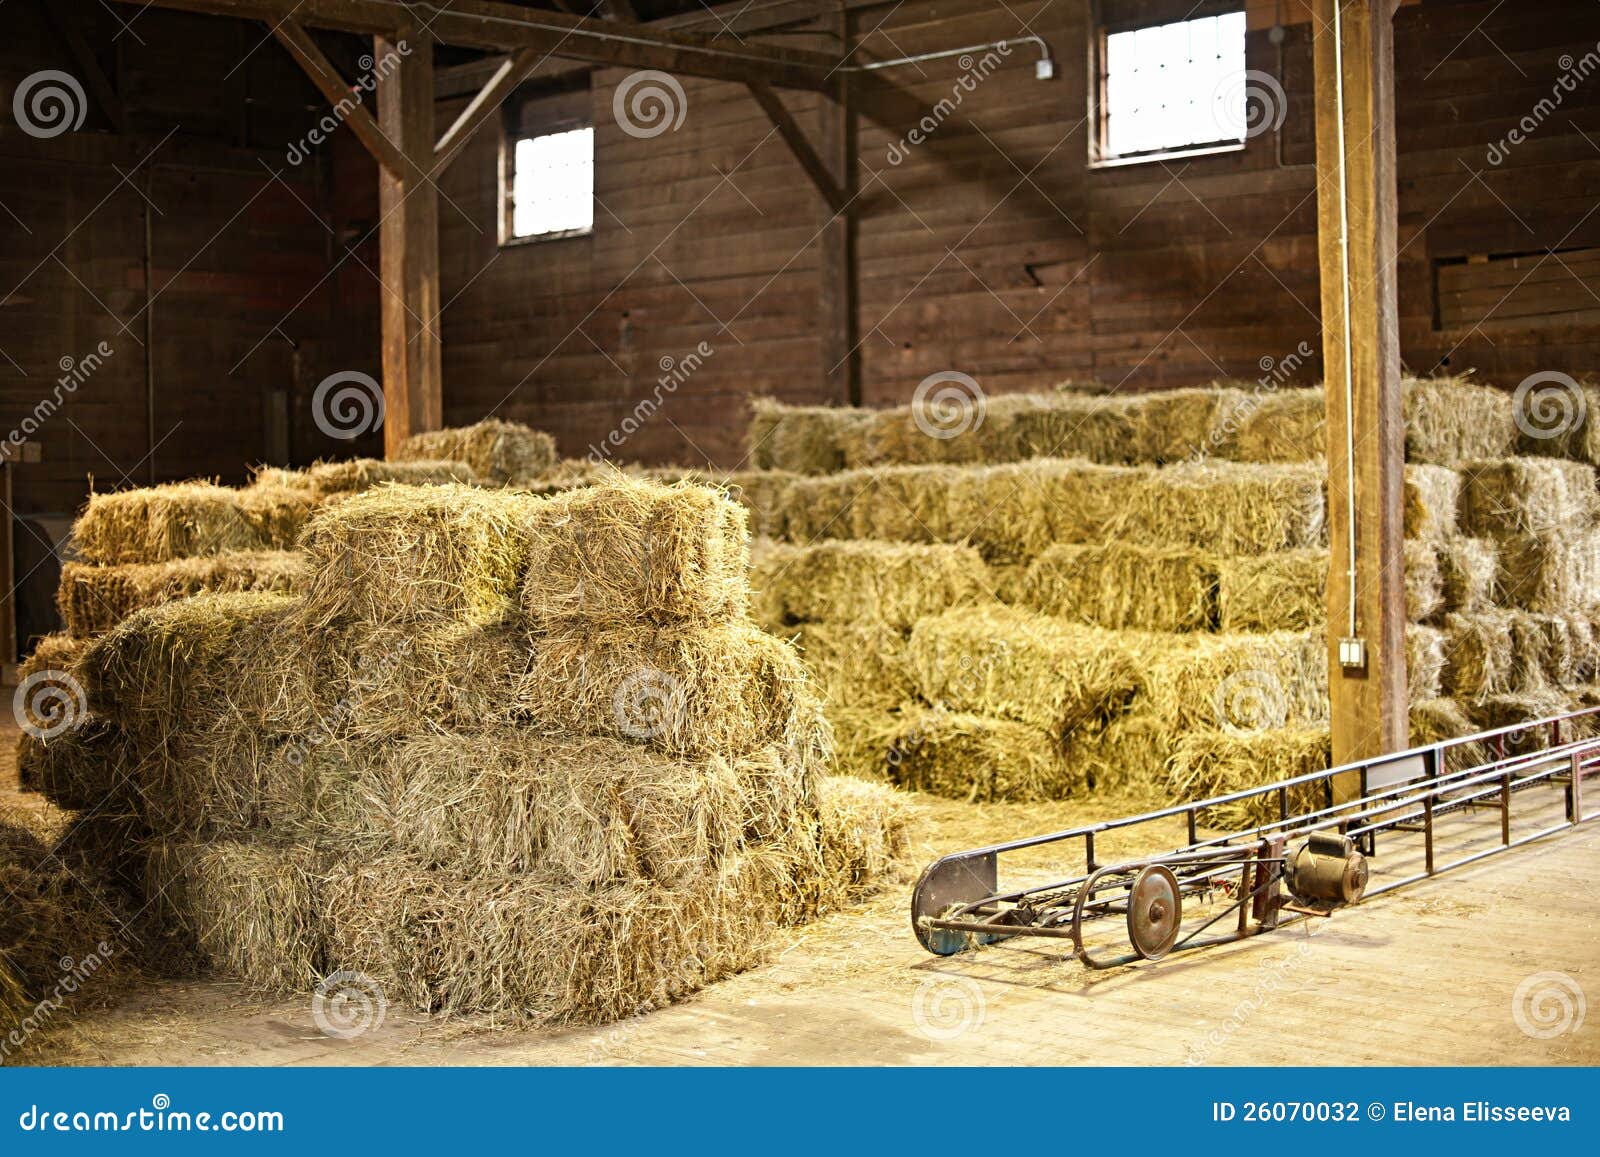 Interior Of Barn With Hay Bales Stock Photo Image Of Food